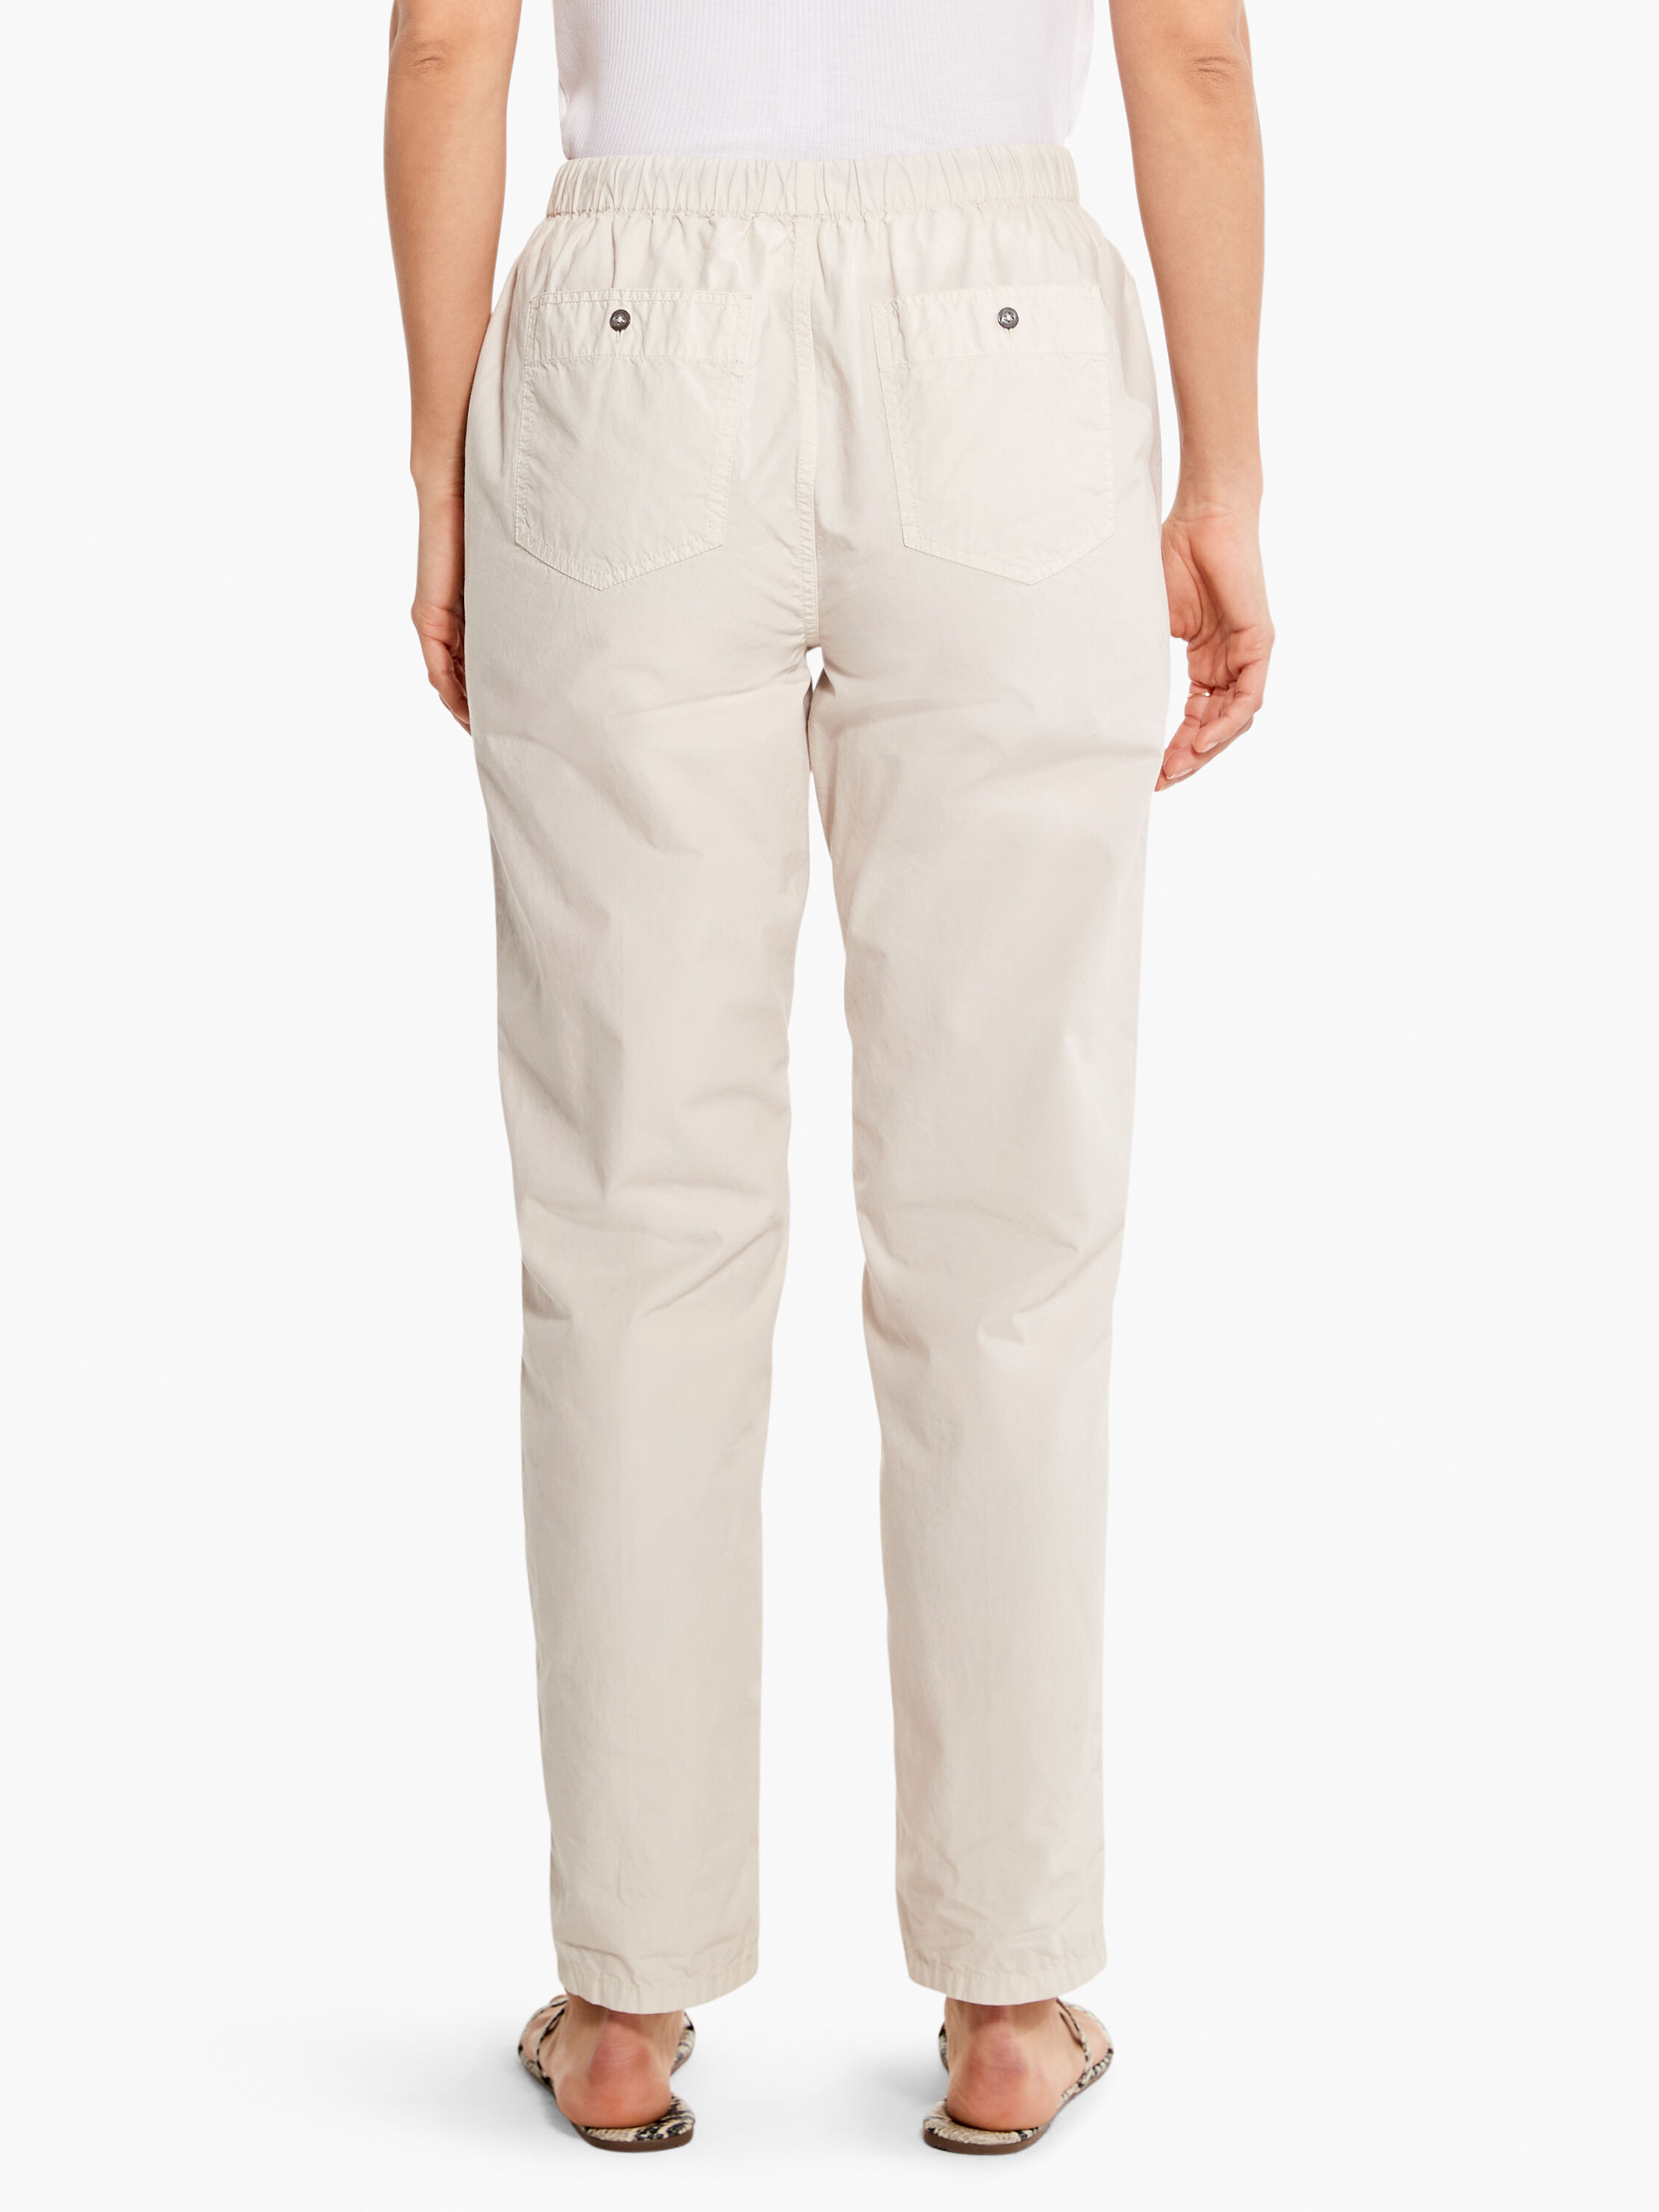 Cotton Poplin Relaxed Ankle Pant | NIC+ZOE